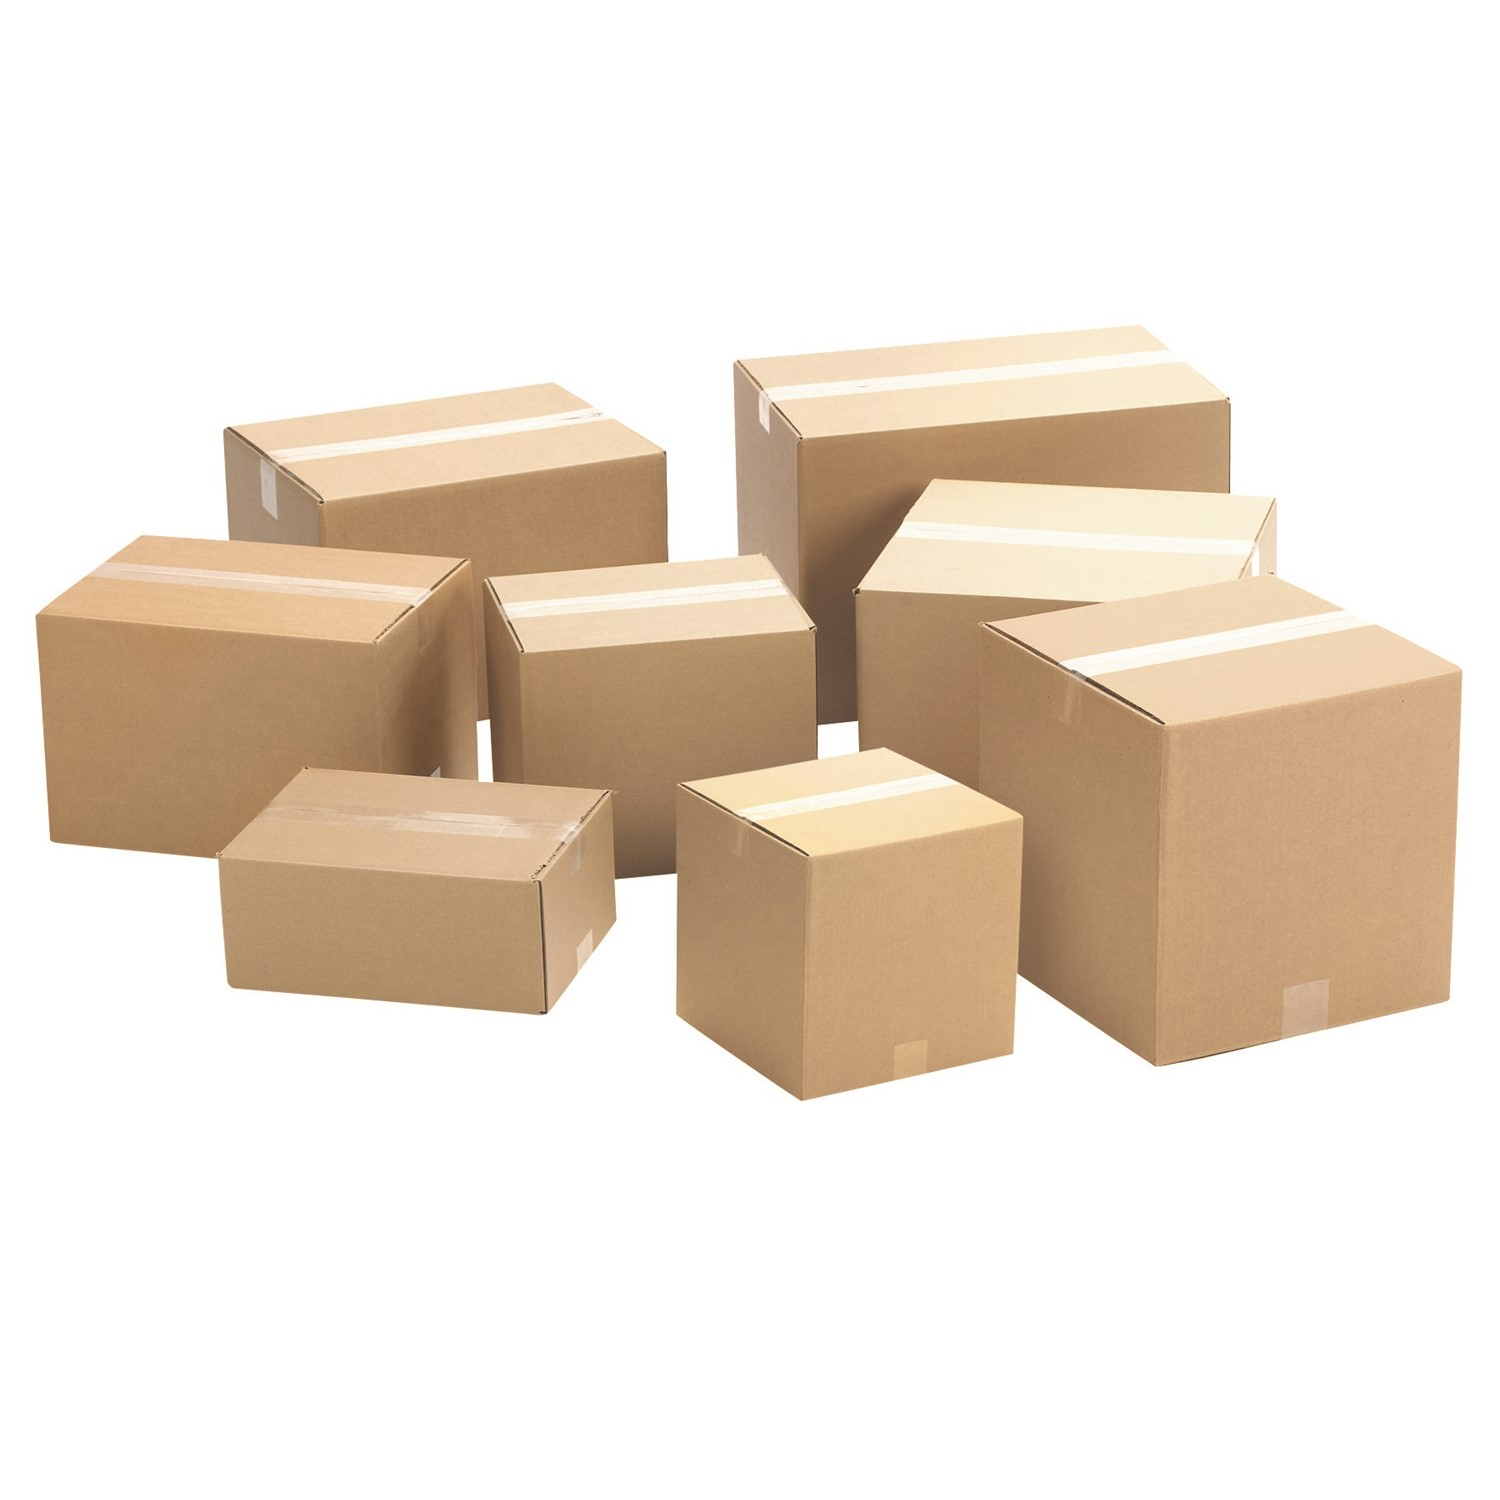 shipping Staples boxes